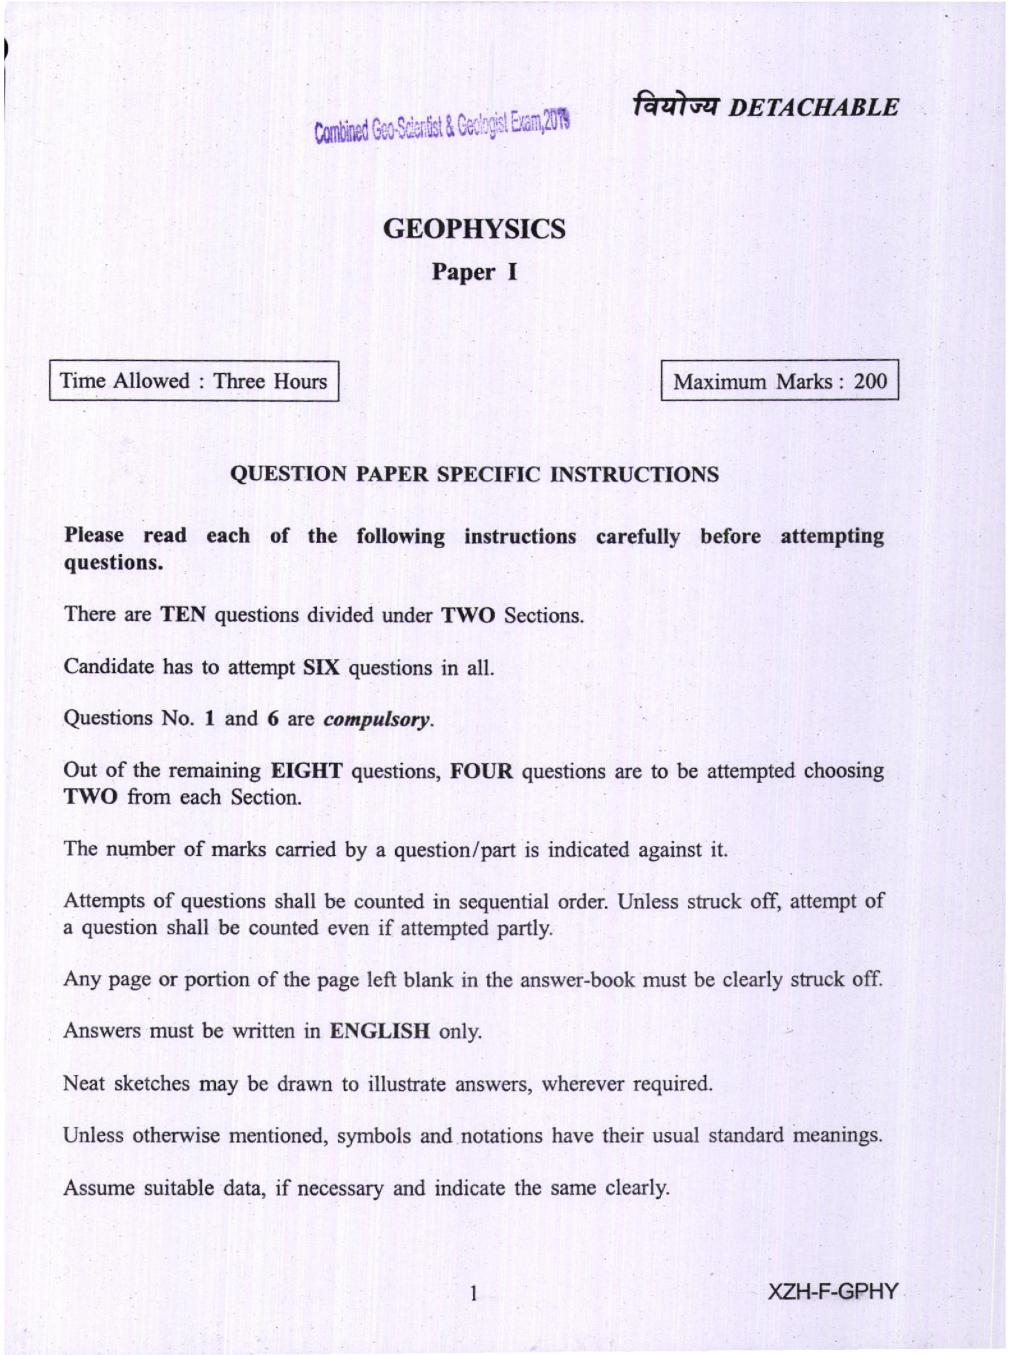 UPSC CGGE 2019 Question Paper Geo-Physics Paper I - Page 1